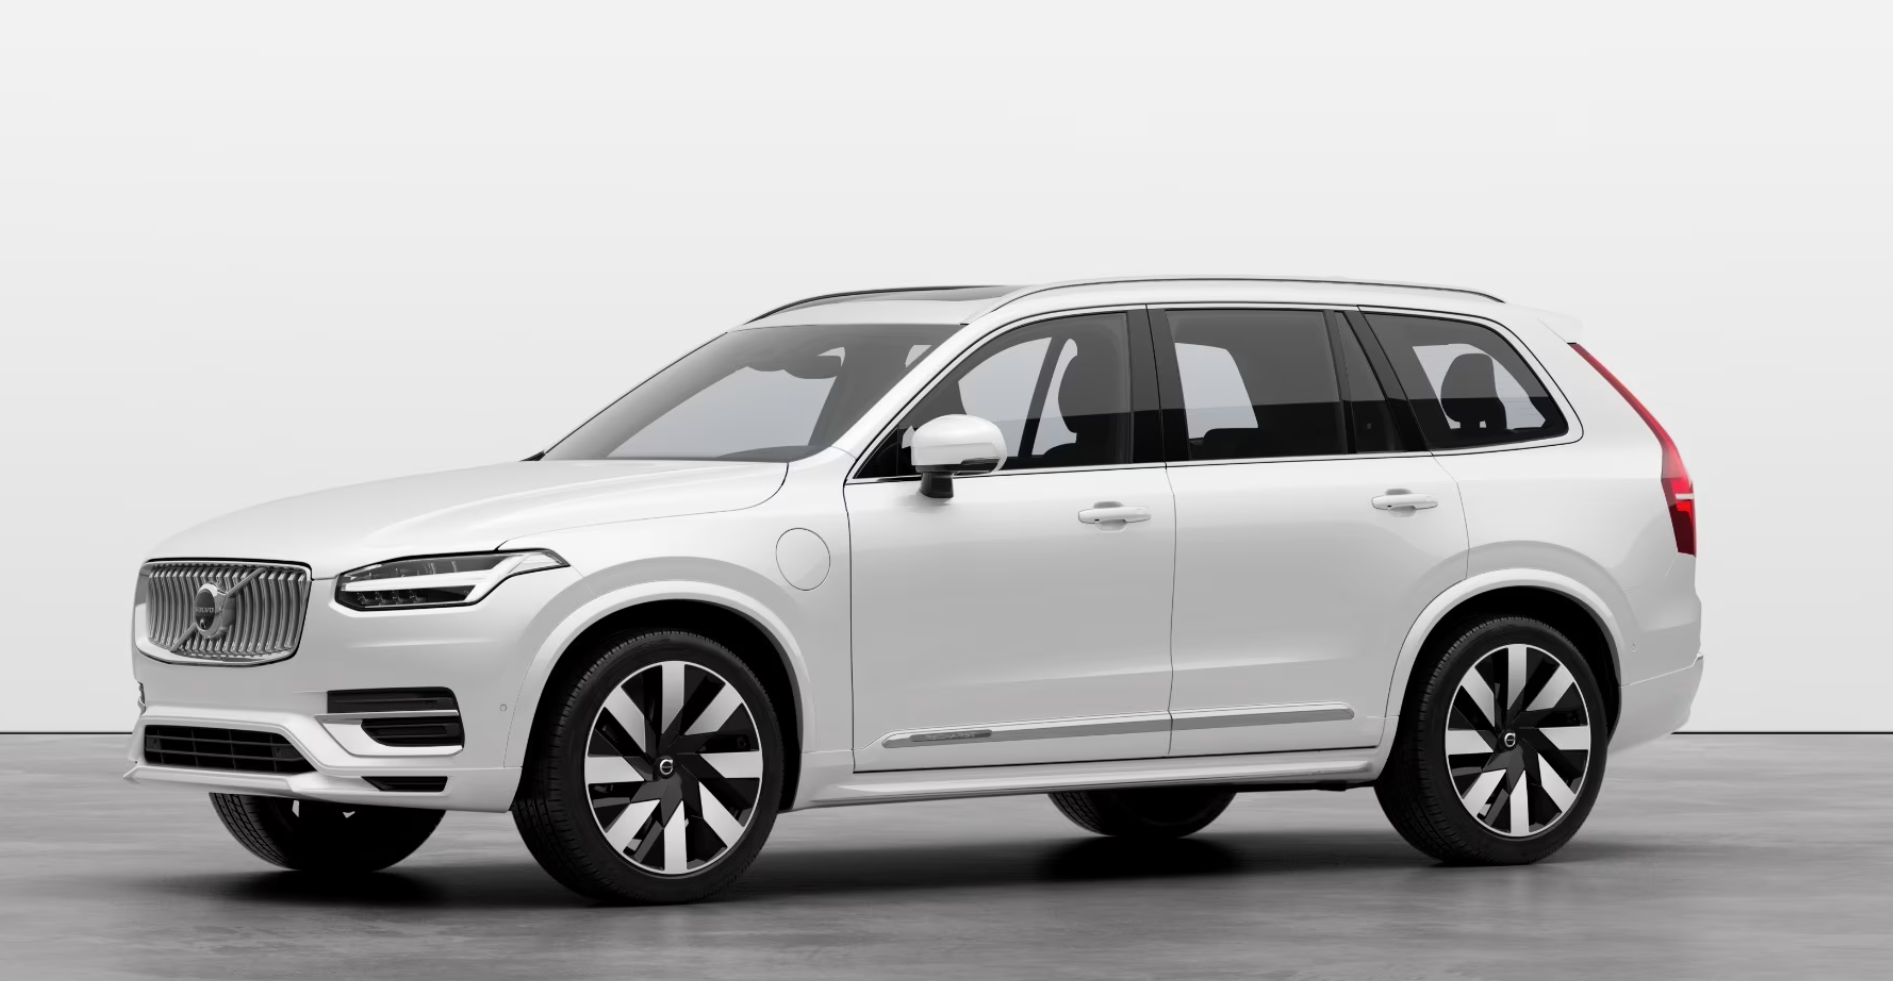 2020 PHEV SUVs: Conquering the Road with Electric Efficiency